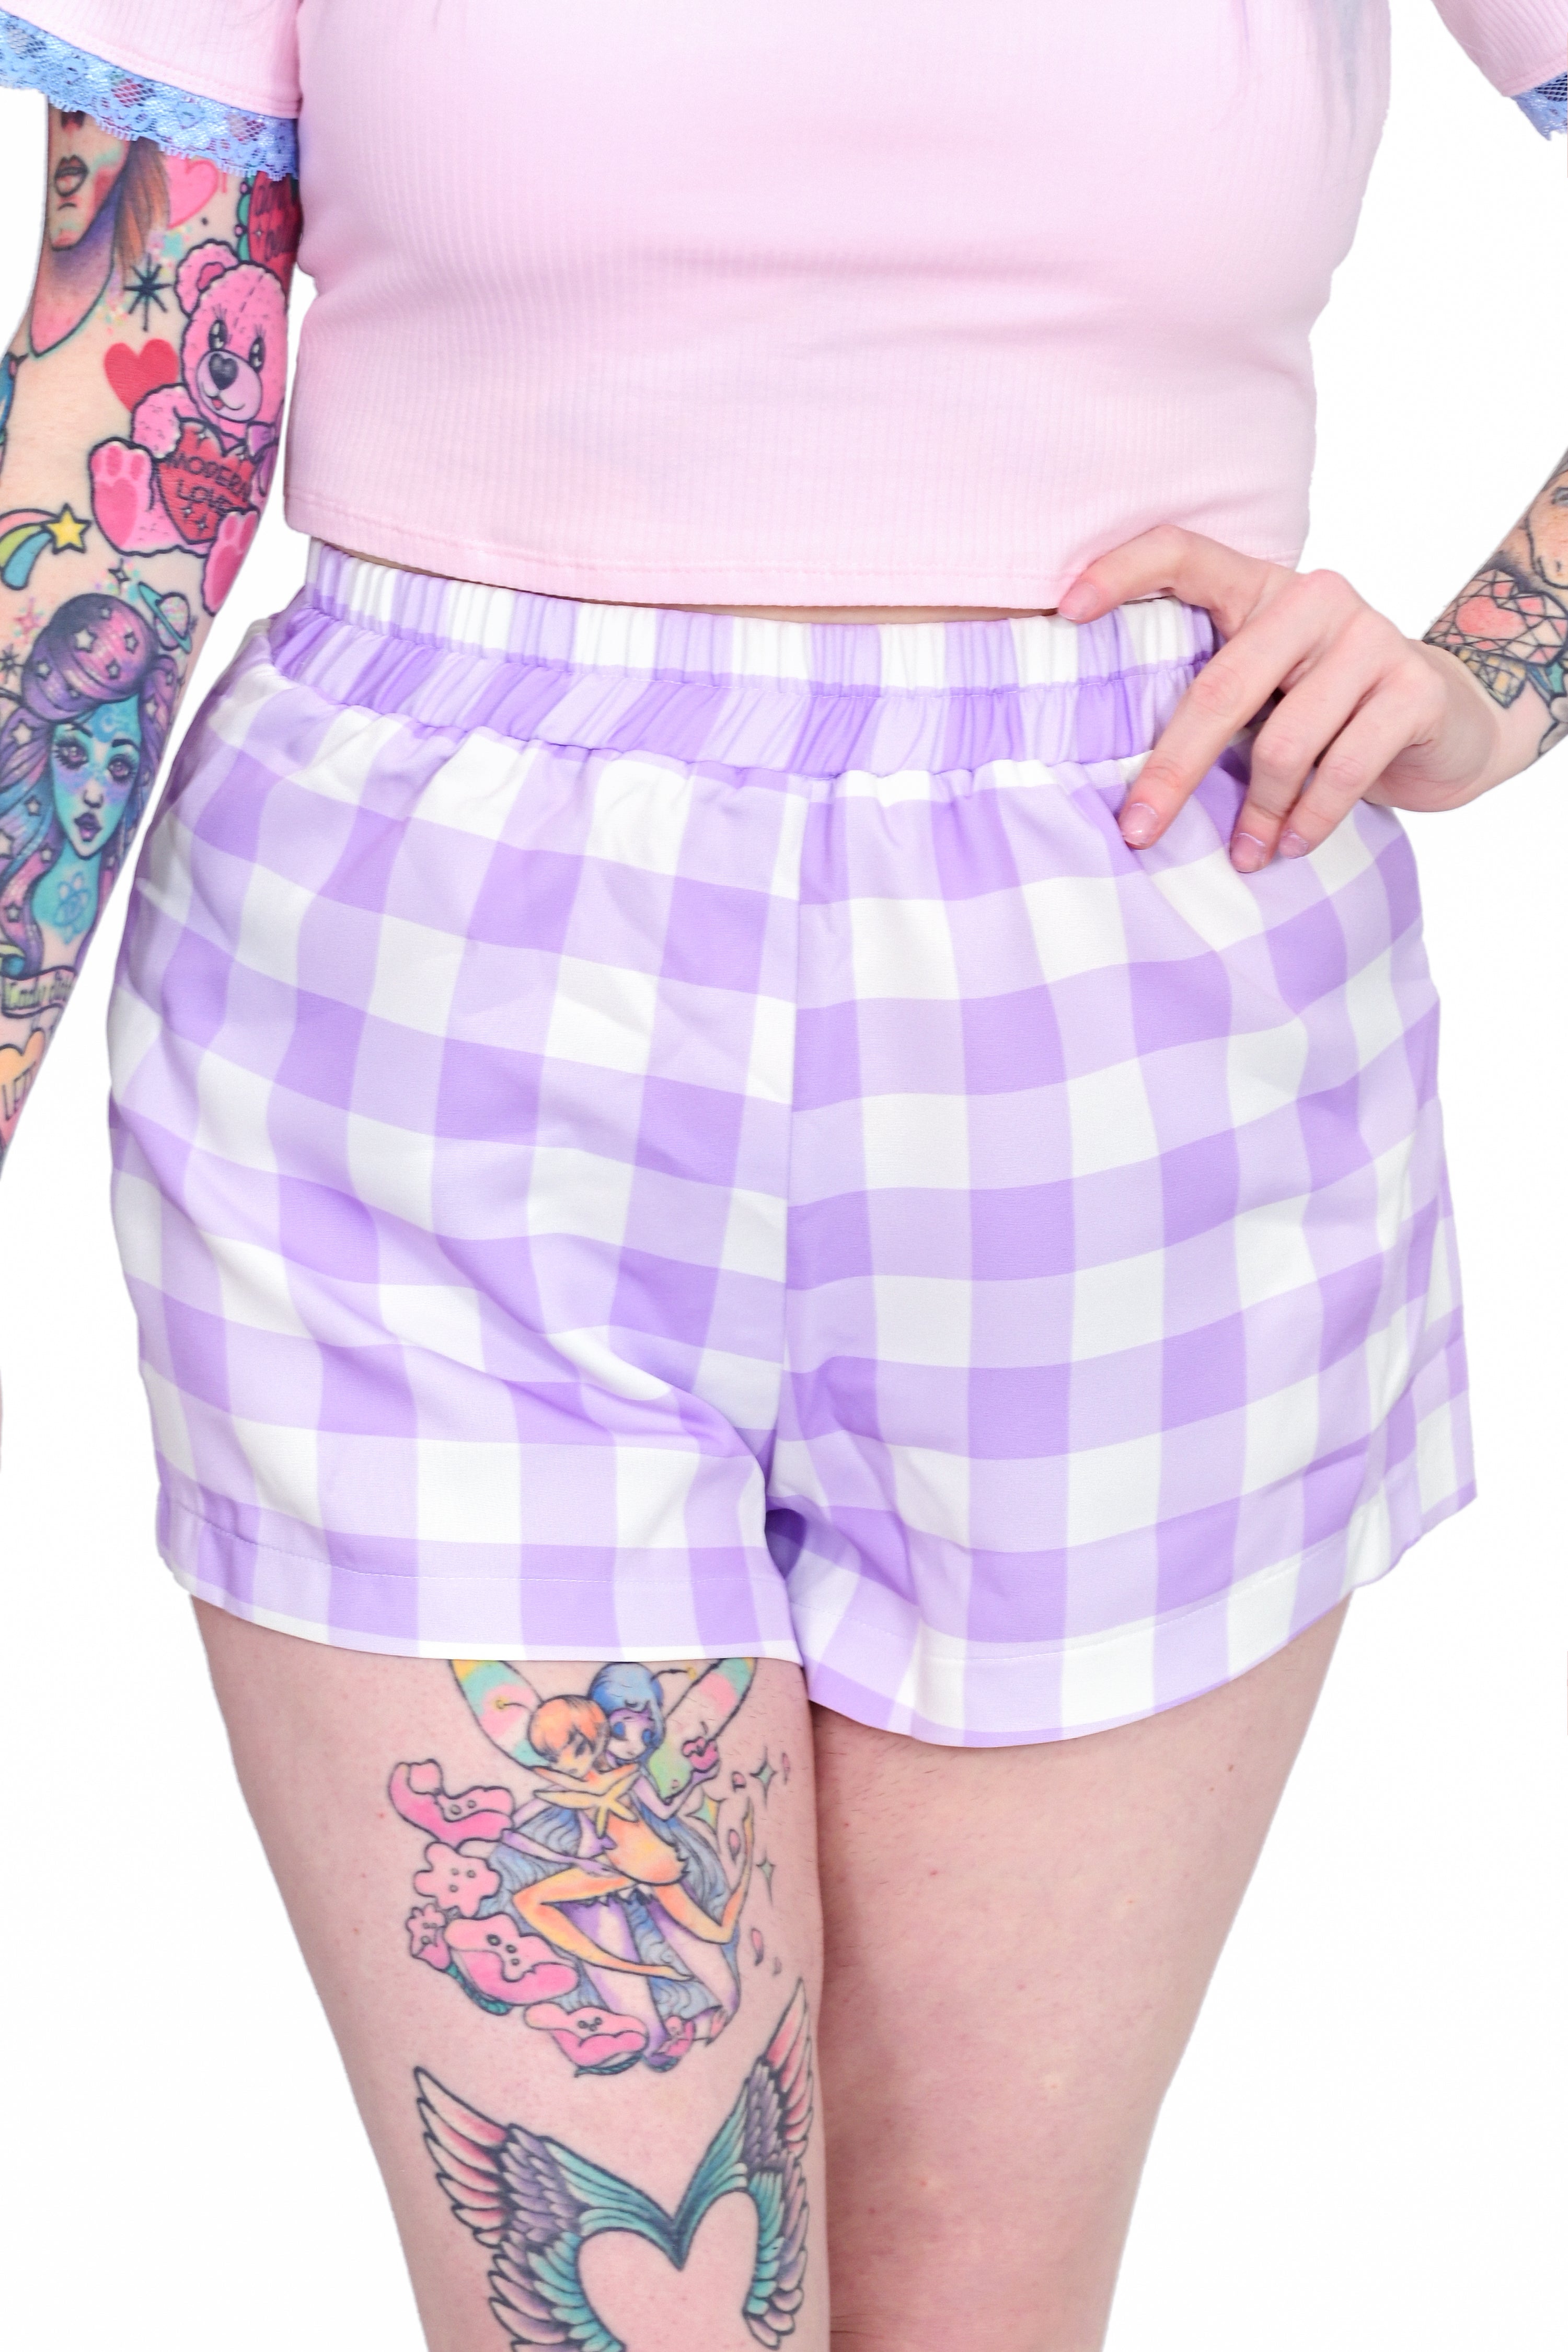 Best Day Ever Shorts - Lavender - Size XS left